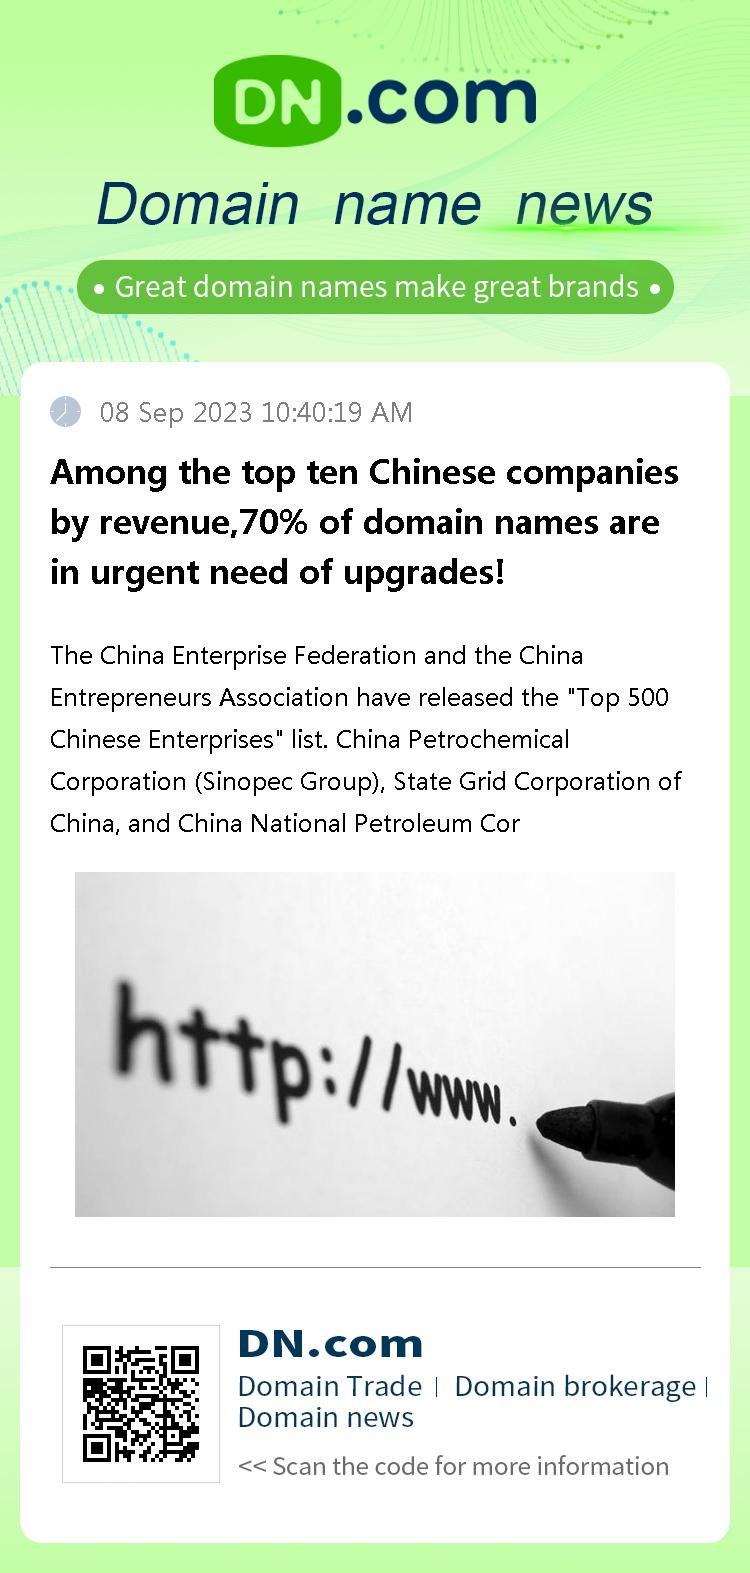 Among the top ten Chinese companies by revenue,70% of domain names are in urgent need of upgrades!